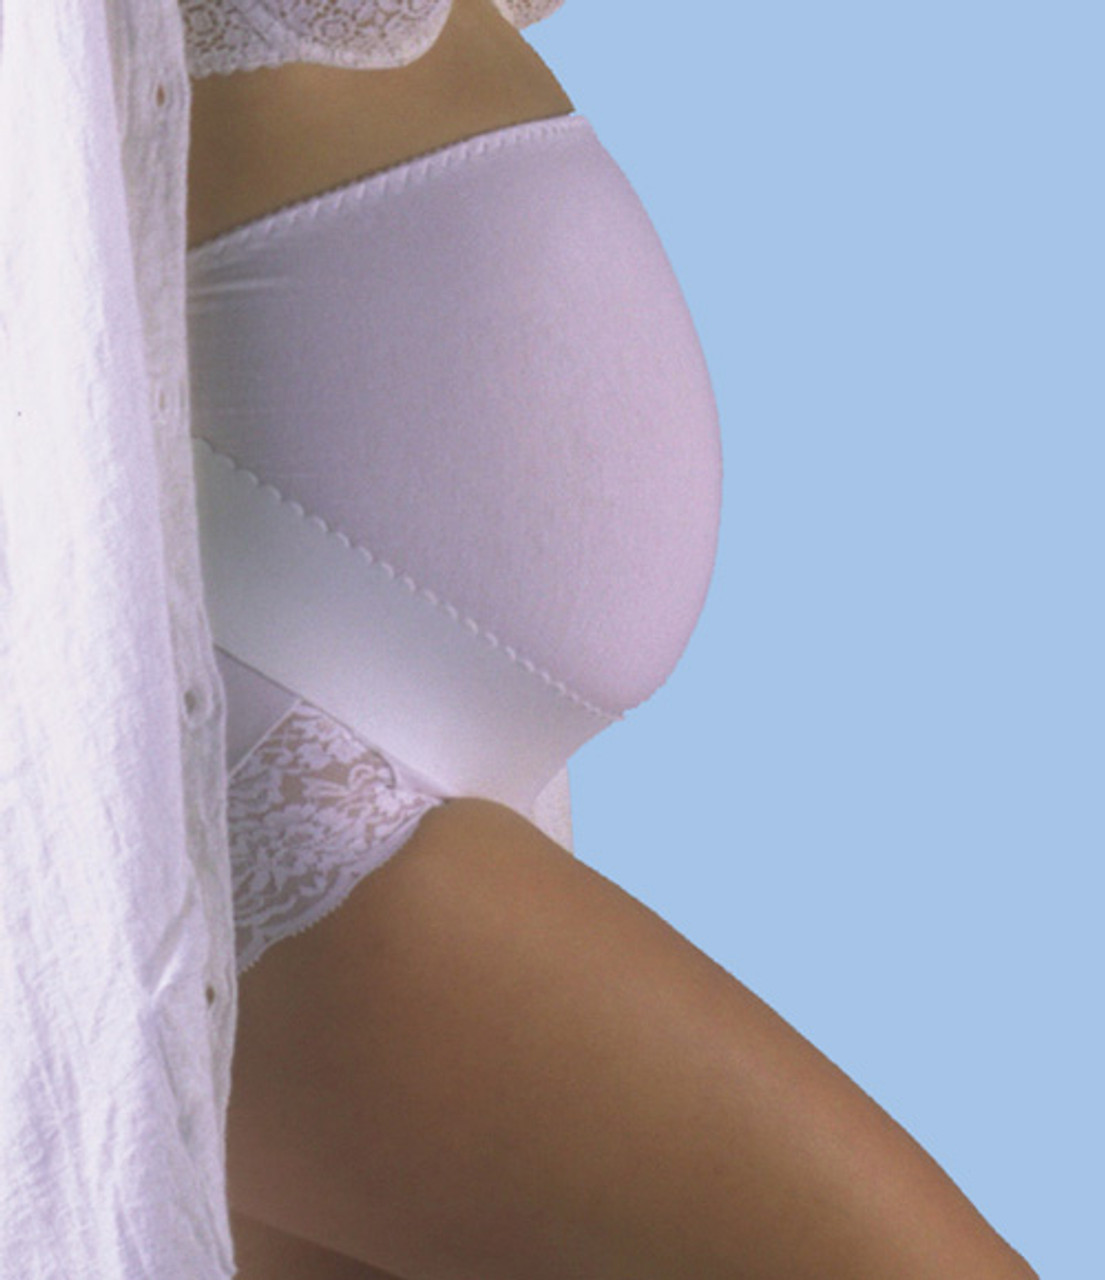 Underworks Maternity Back and Tummy Support Girdle with Varicosity